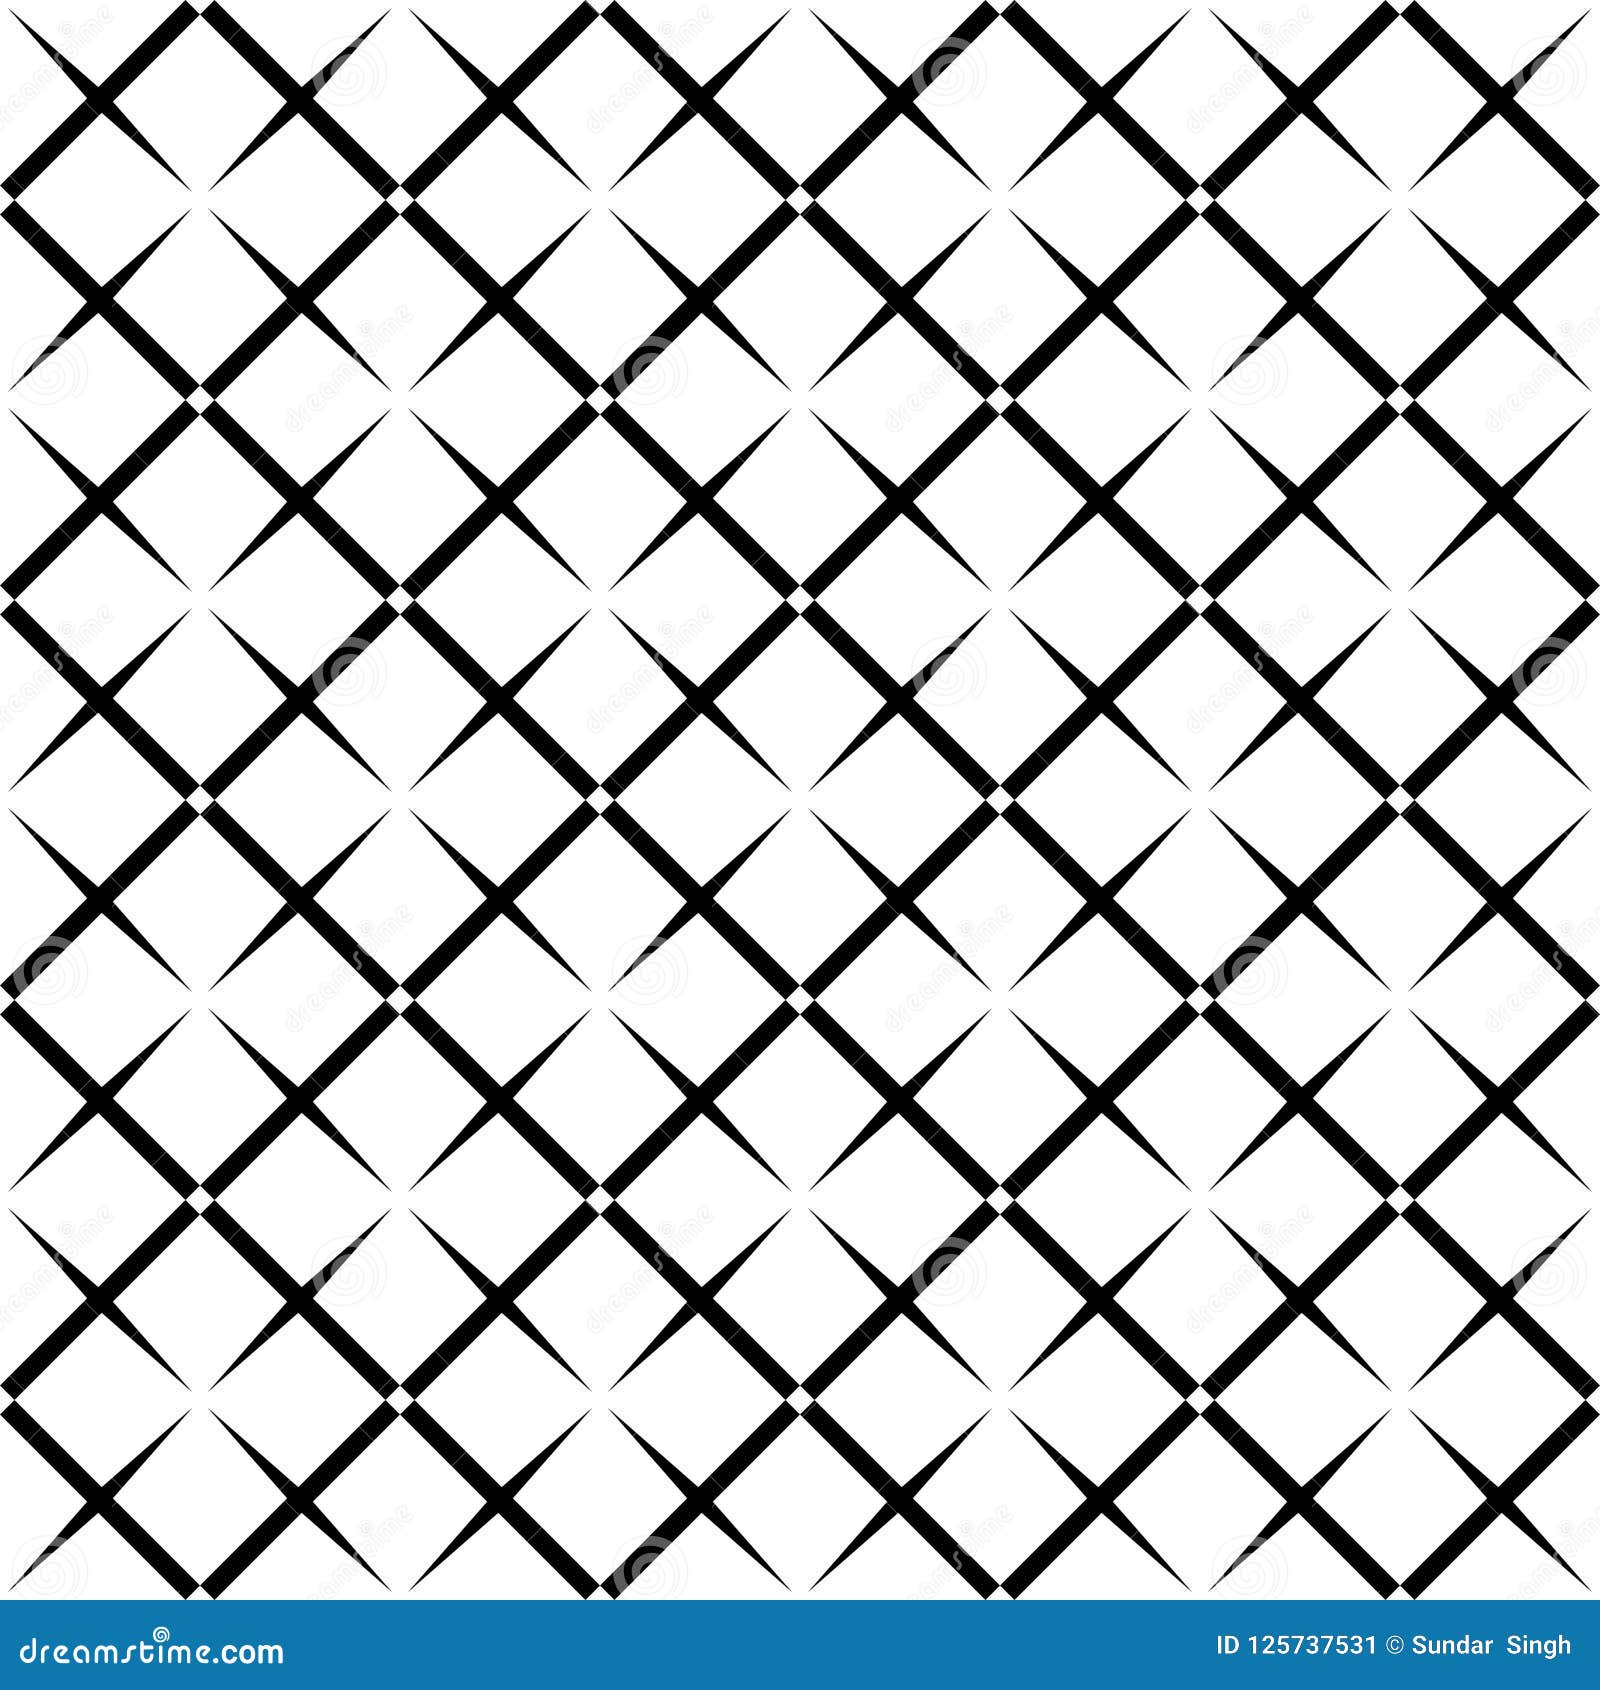 Seamless Abstract Black And White Square Grid Pattern Halftone